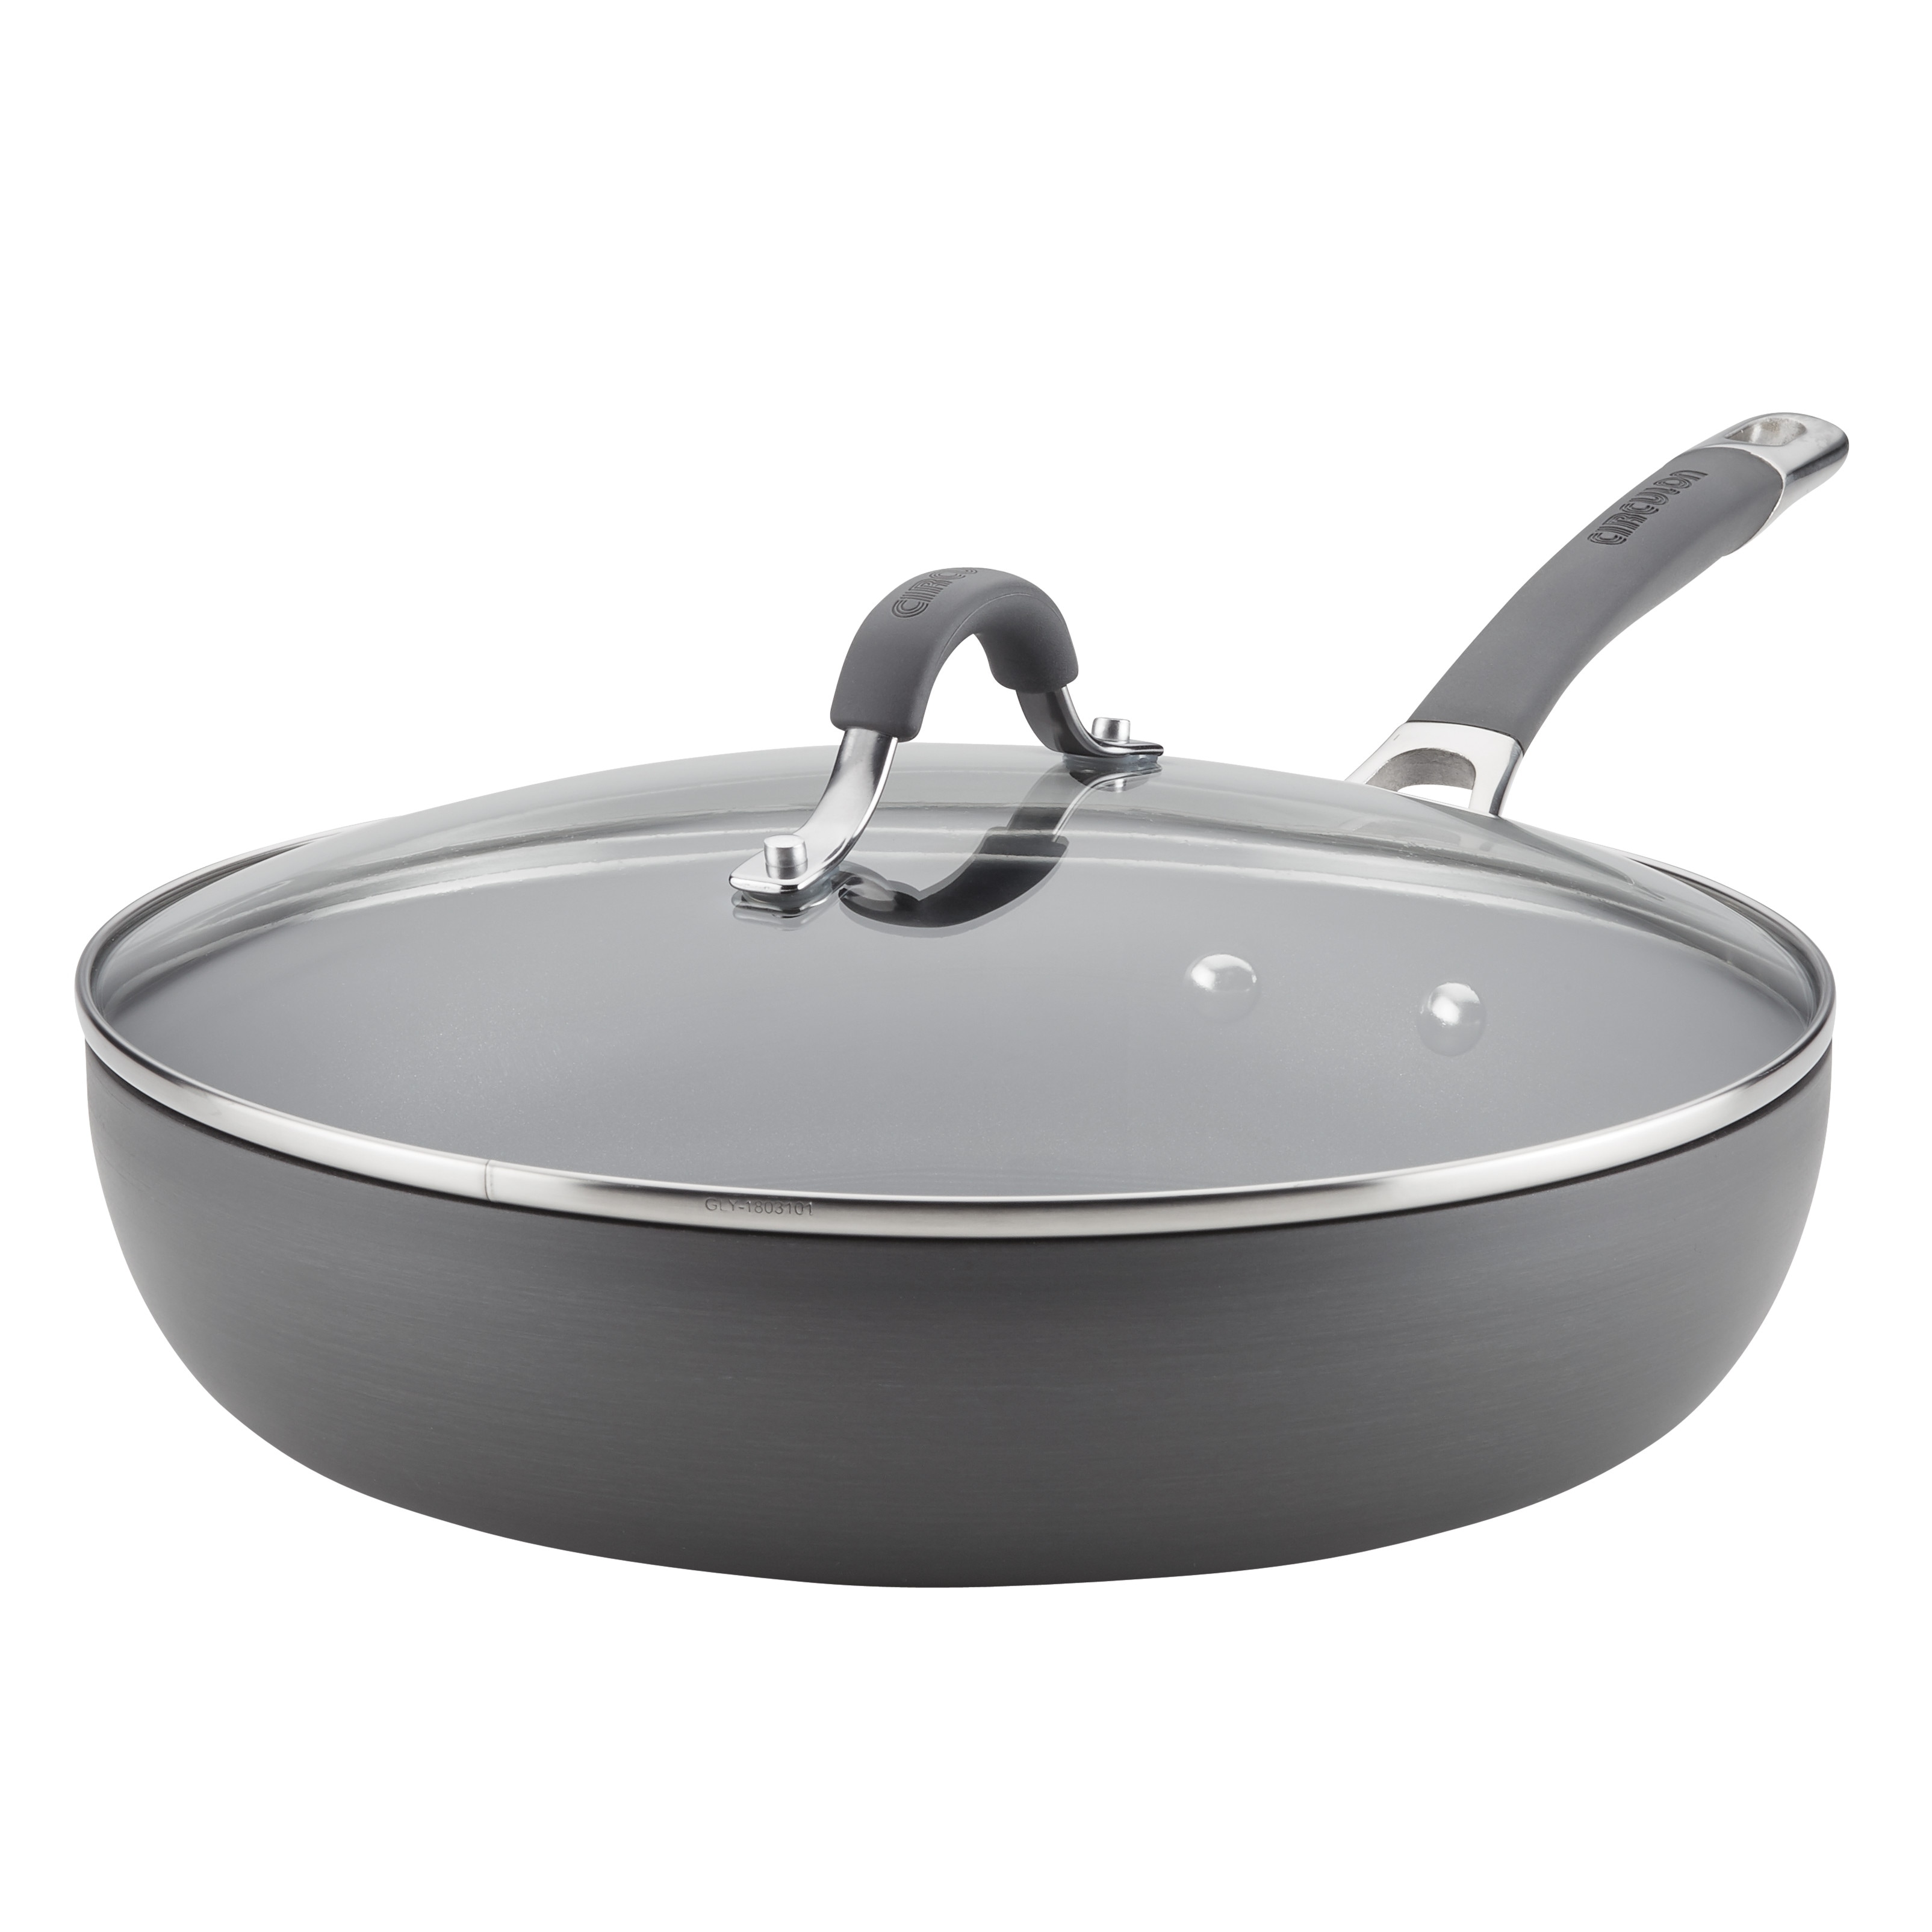 12-Inch Deep Frying Pan with Lid and Helper Handle